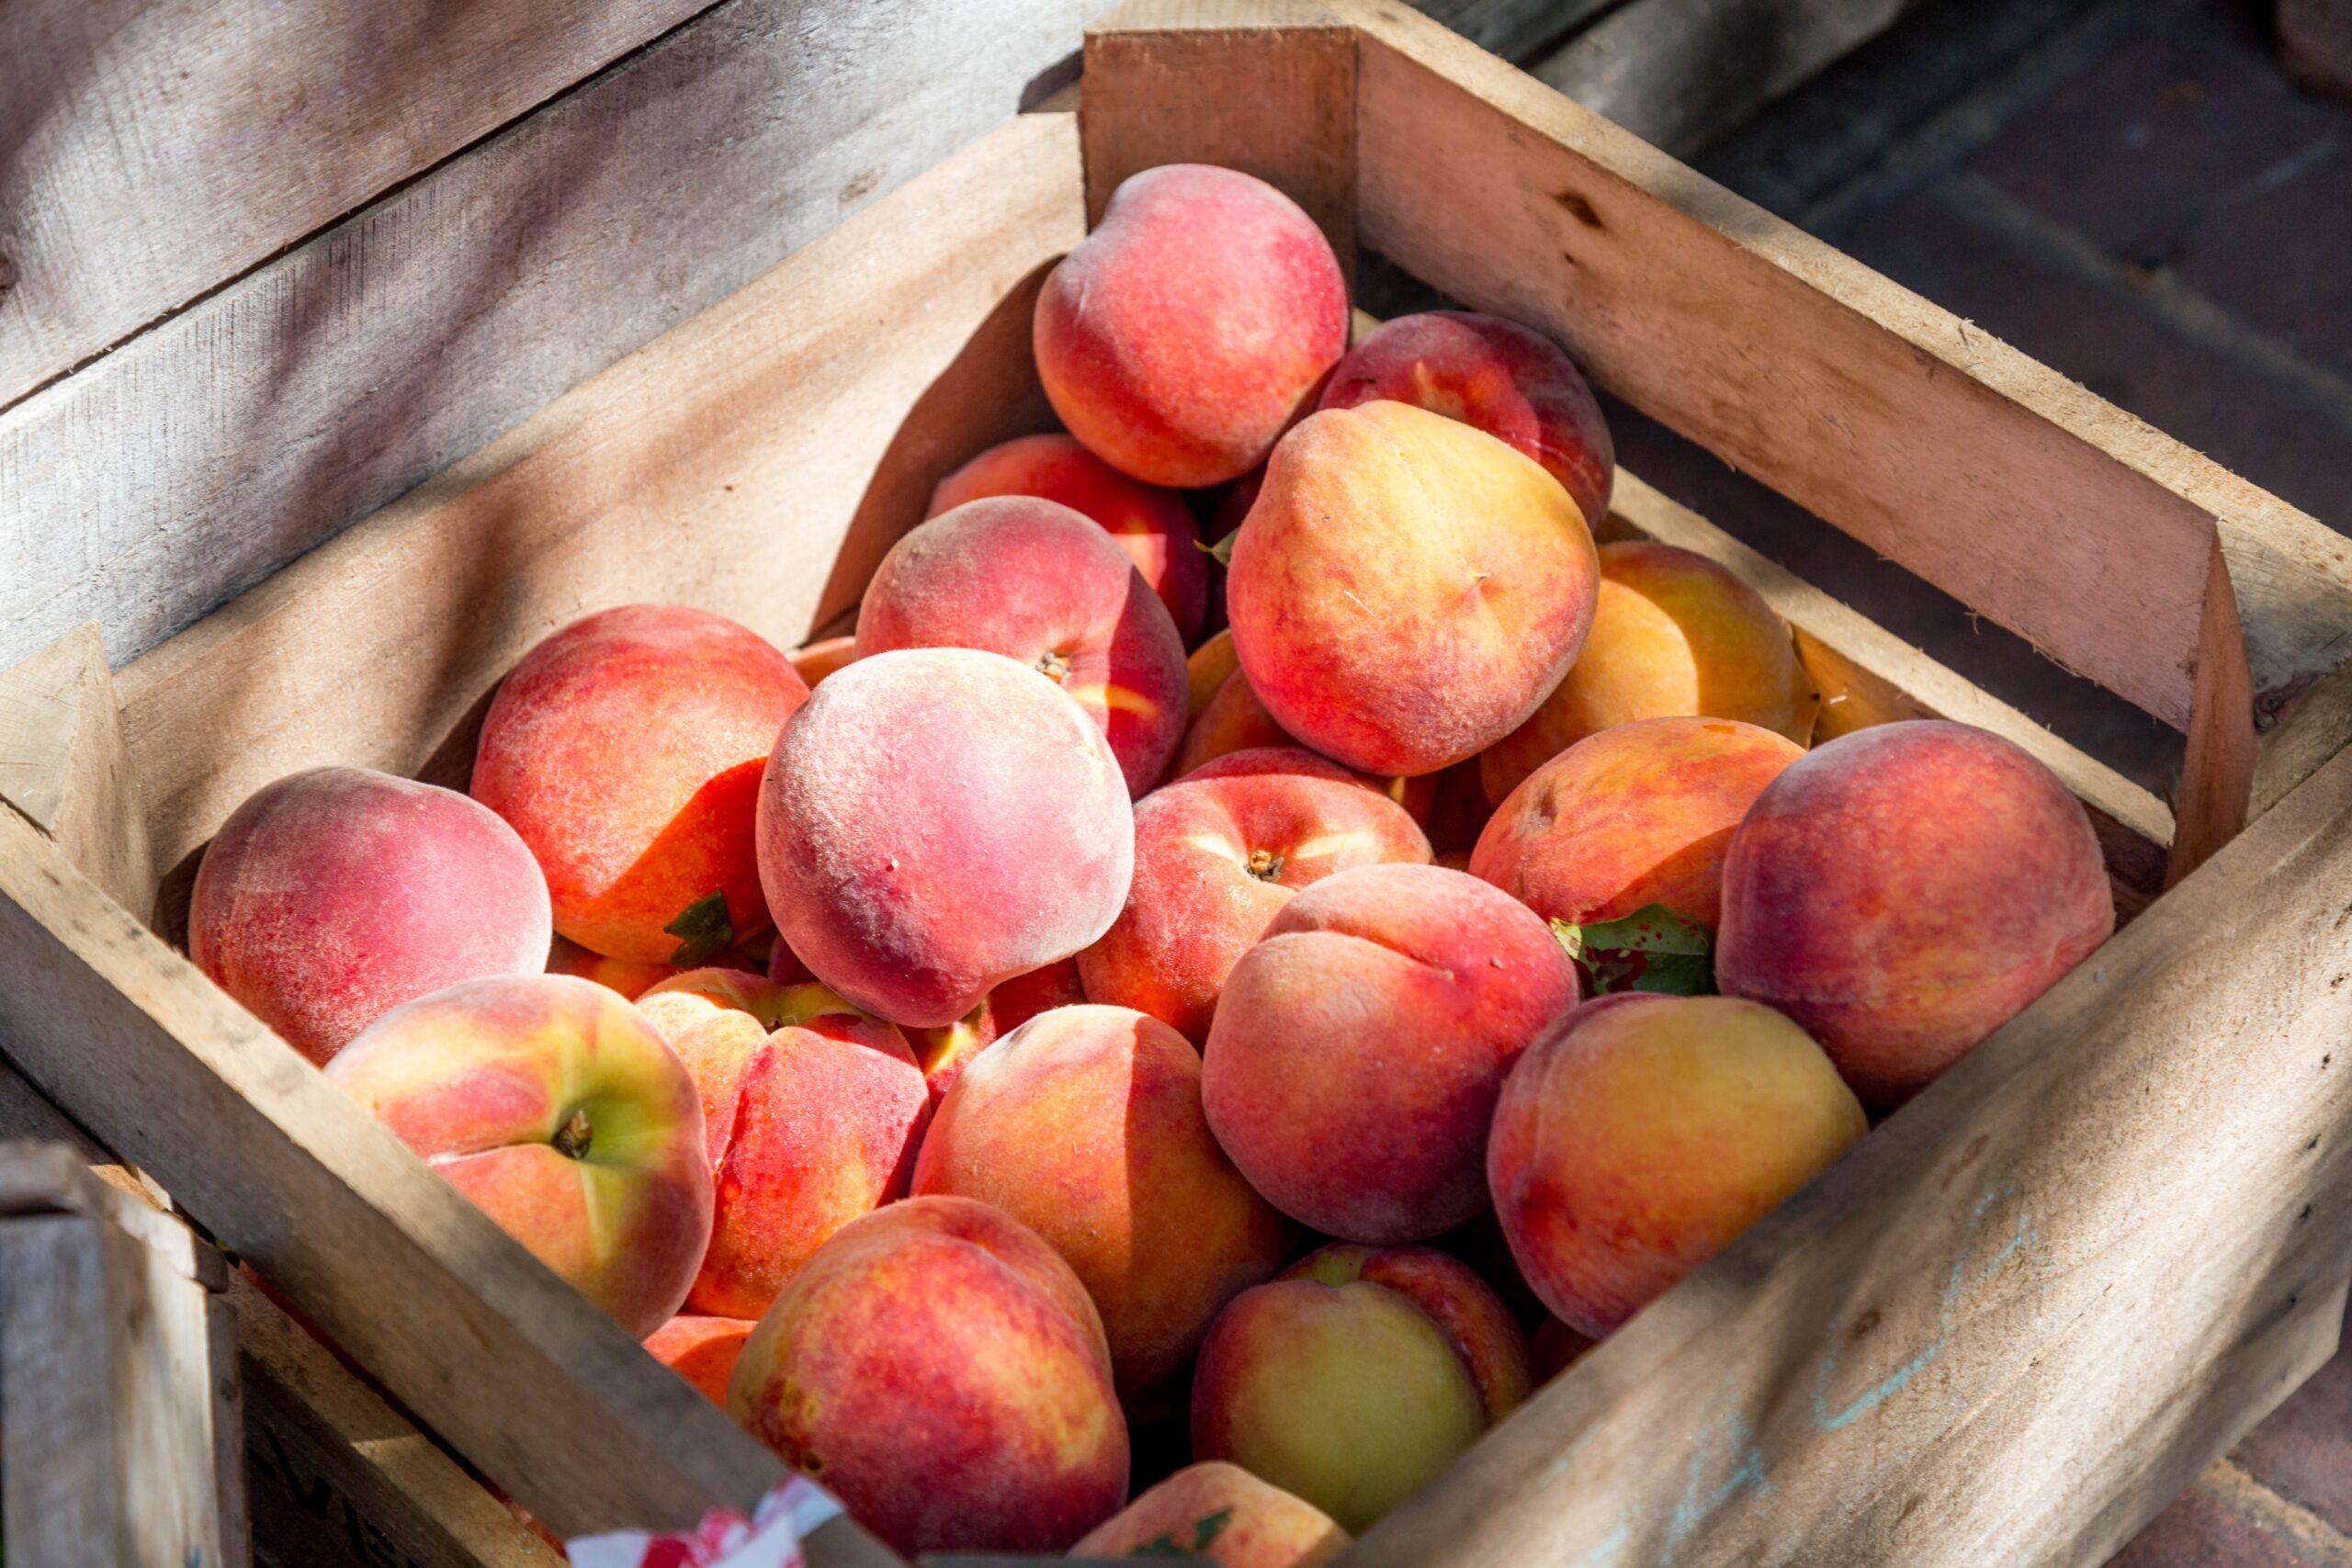 Are Peaches A Prominent Ingredient In Southern Cuisine?